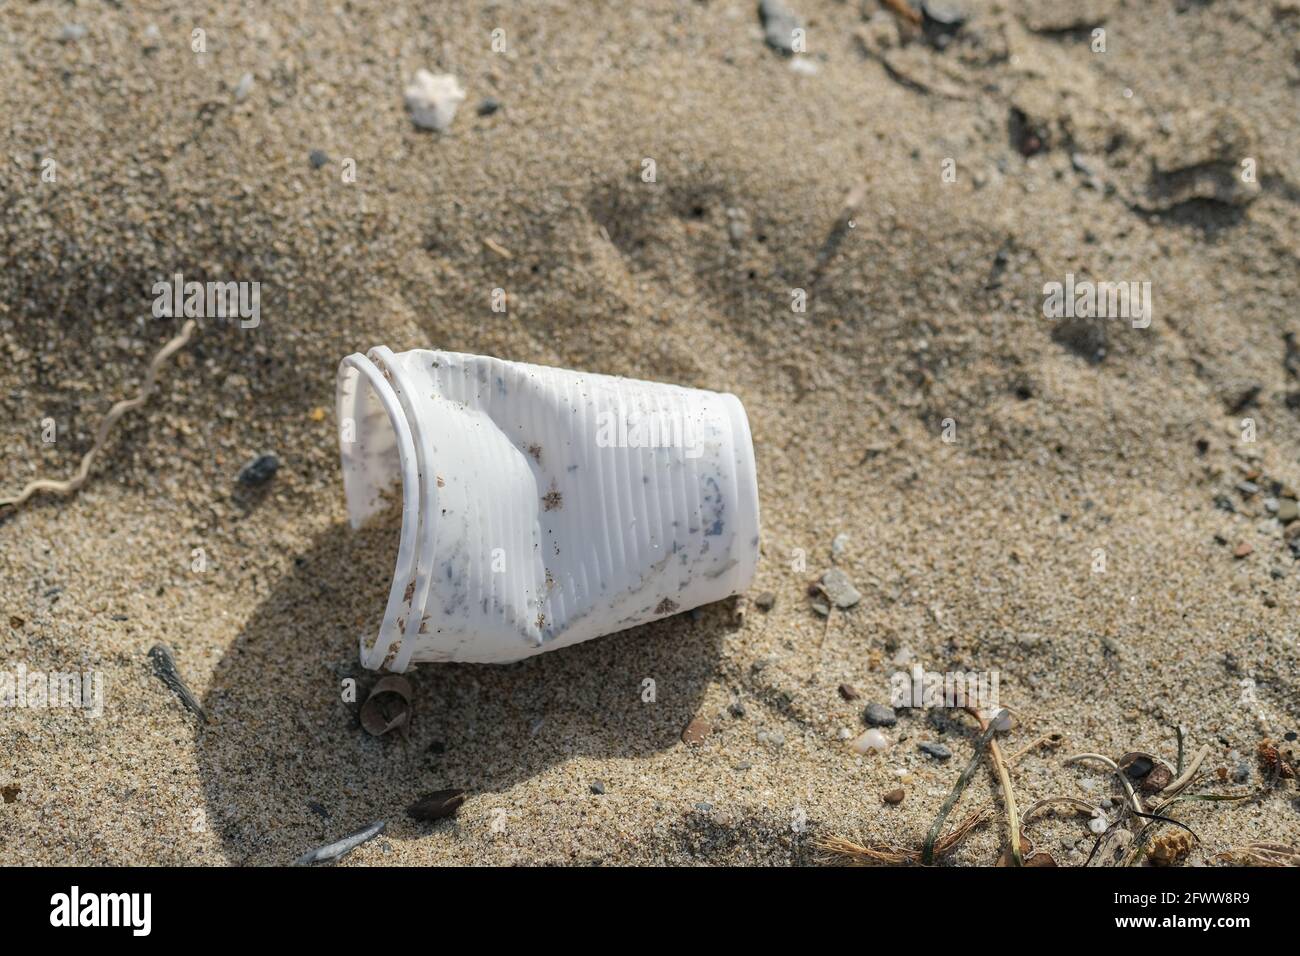 Disposable plastic cup discarded on sea coast ecosystem,nature waste pollution Stock Photo